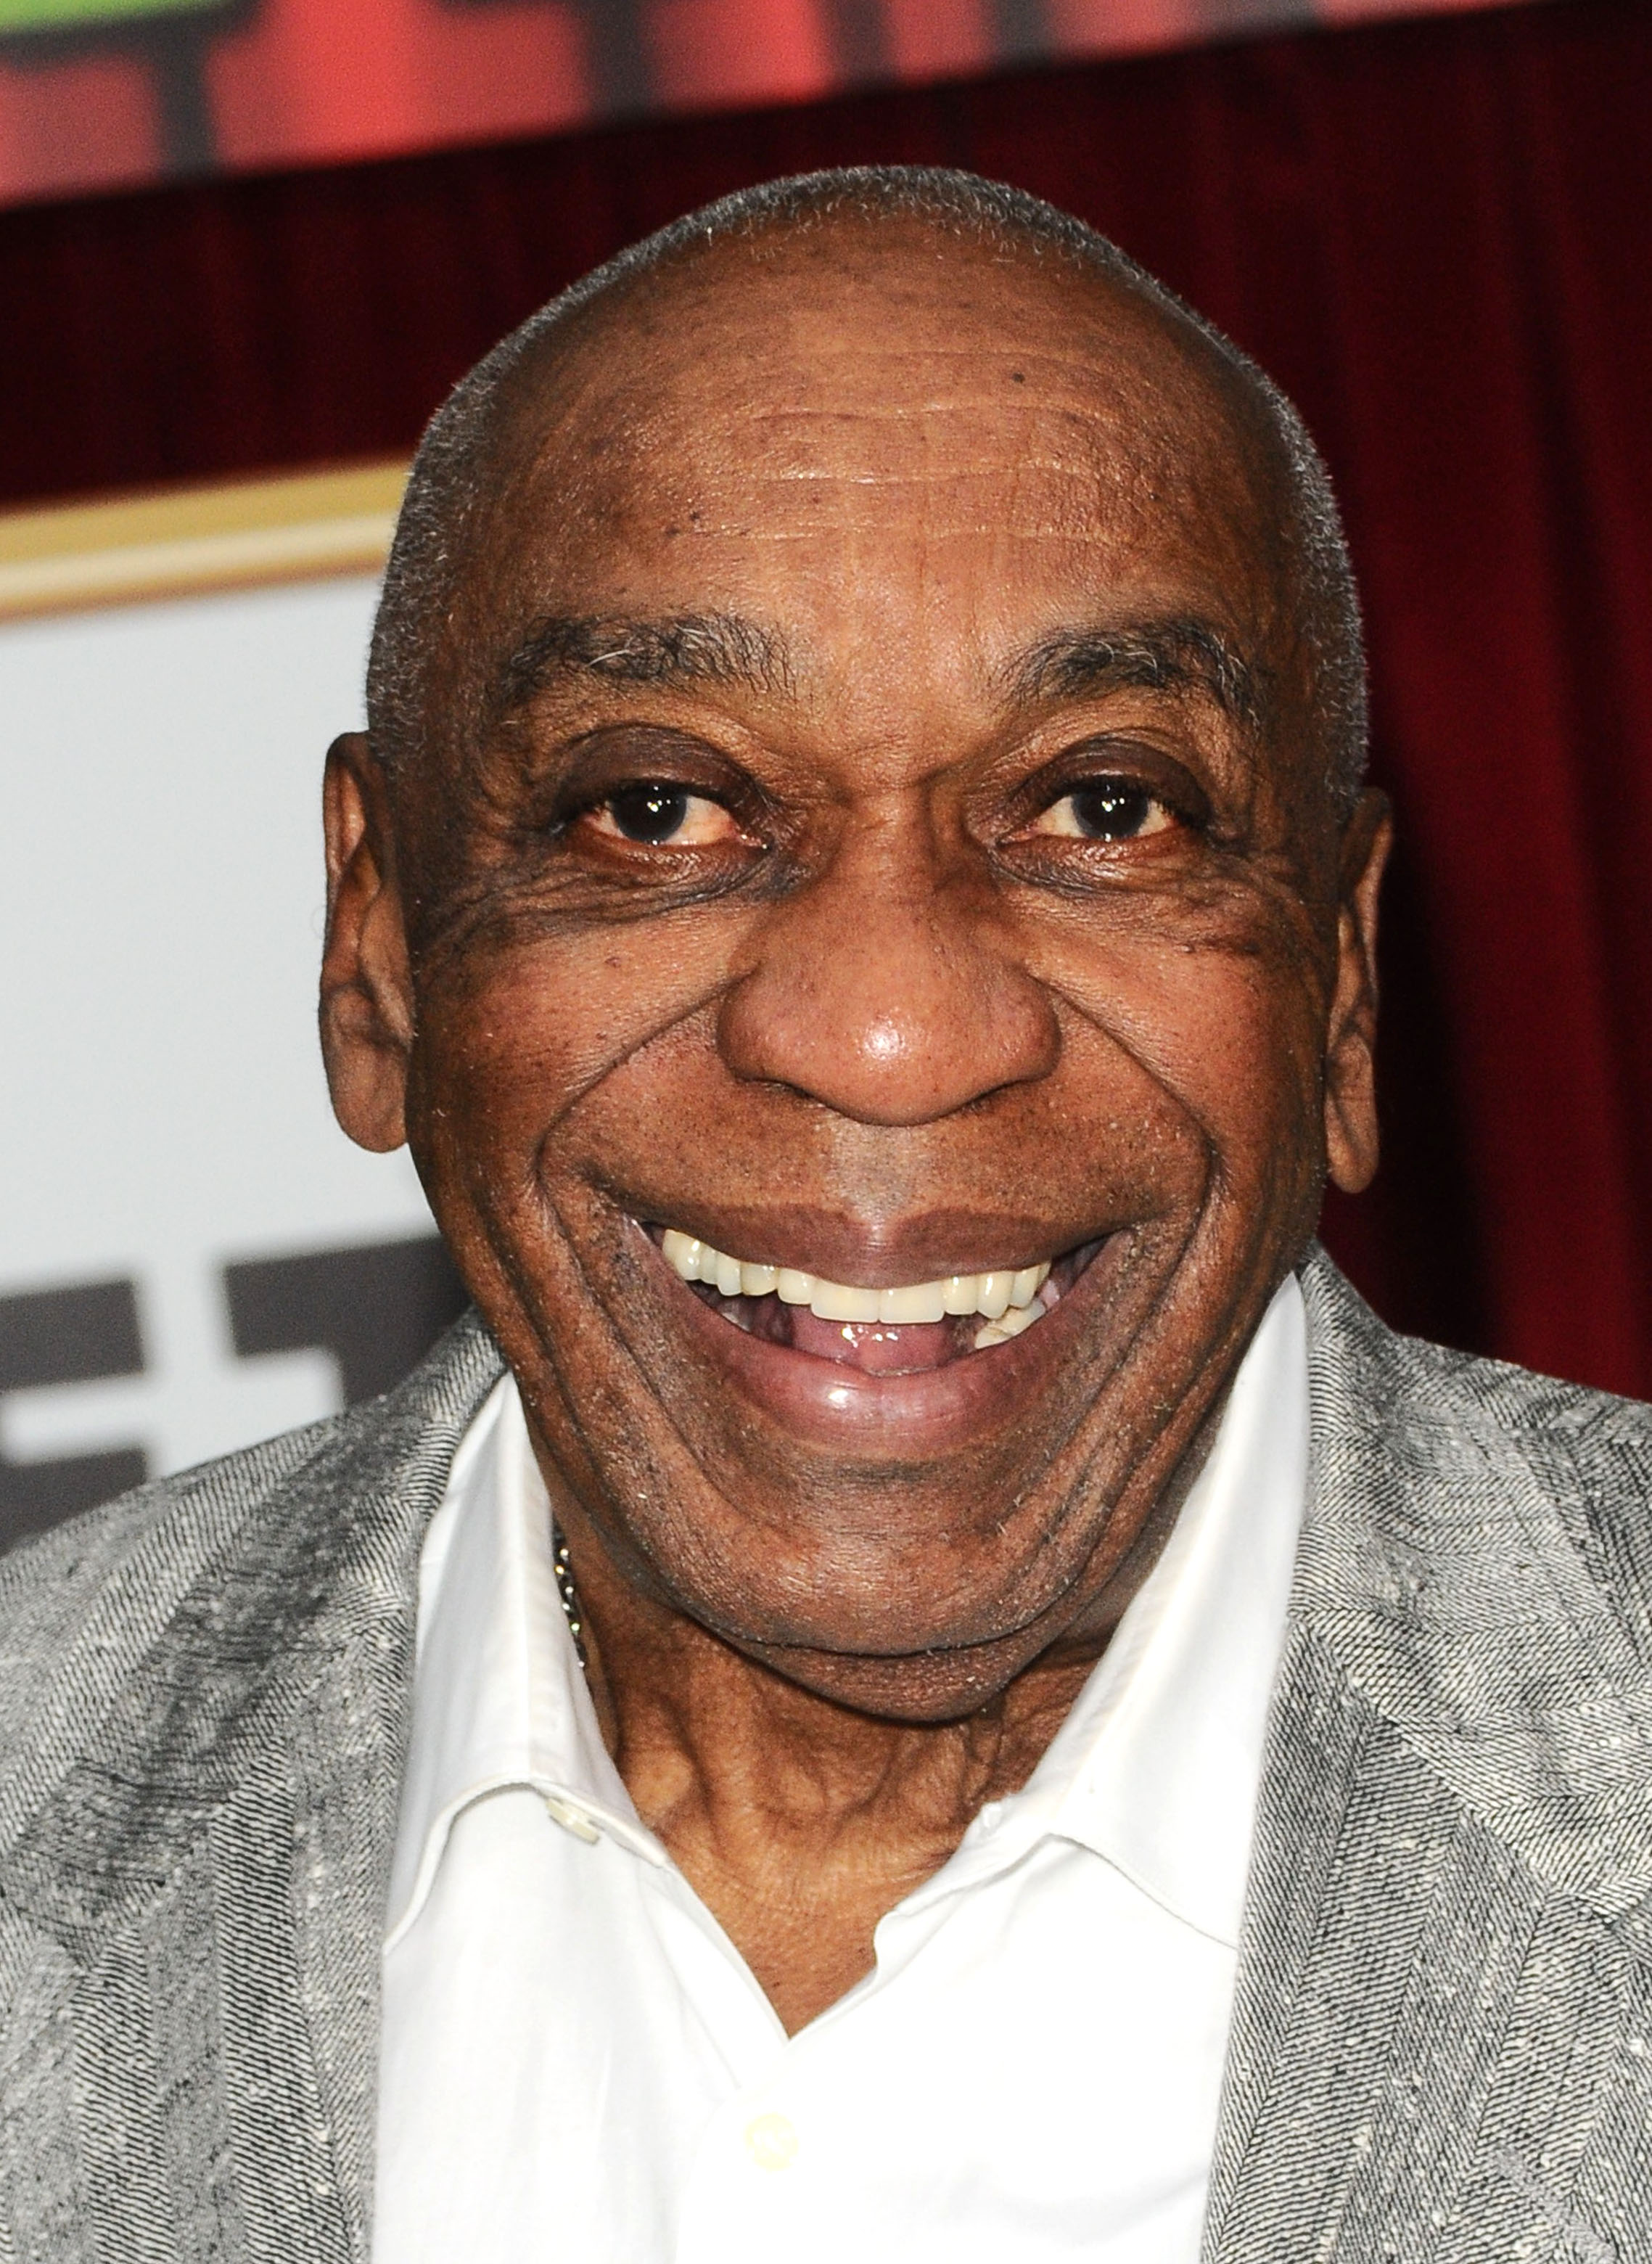 Over the last few decades, Bill Cobbs has starred in many movies and TV shows